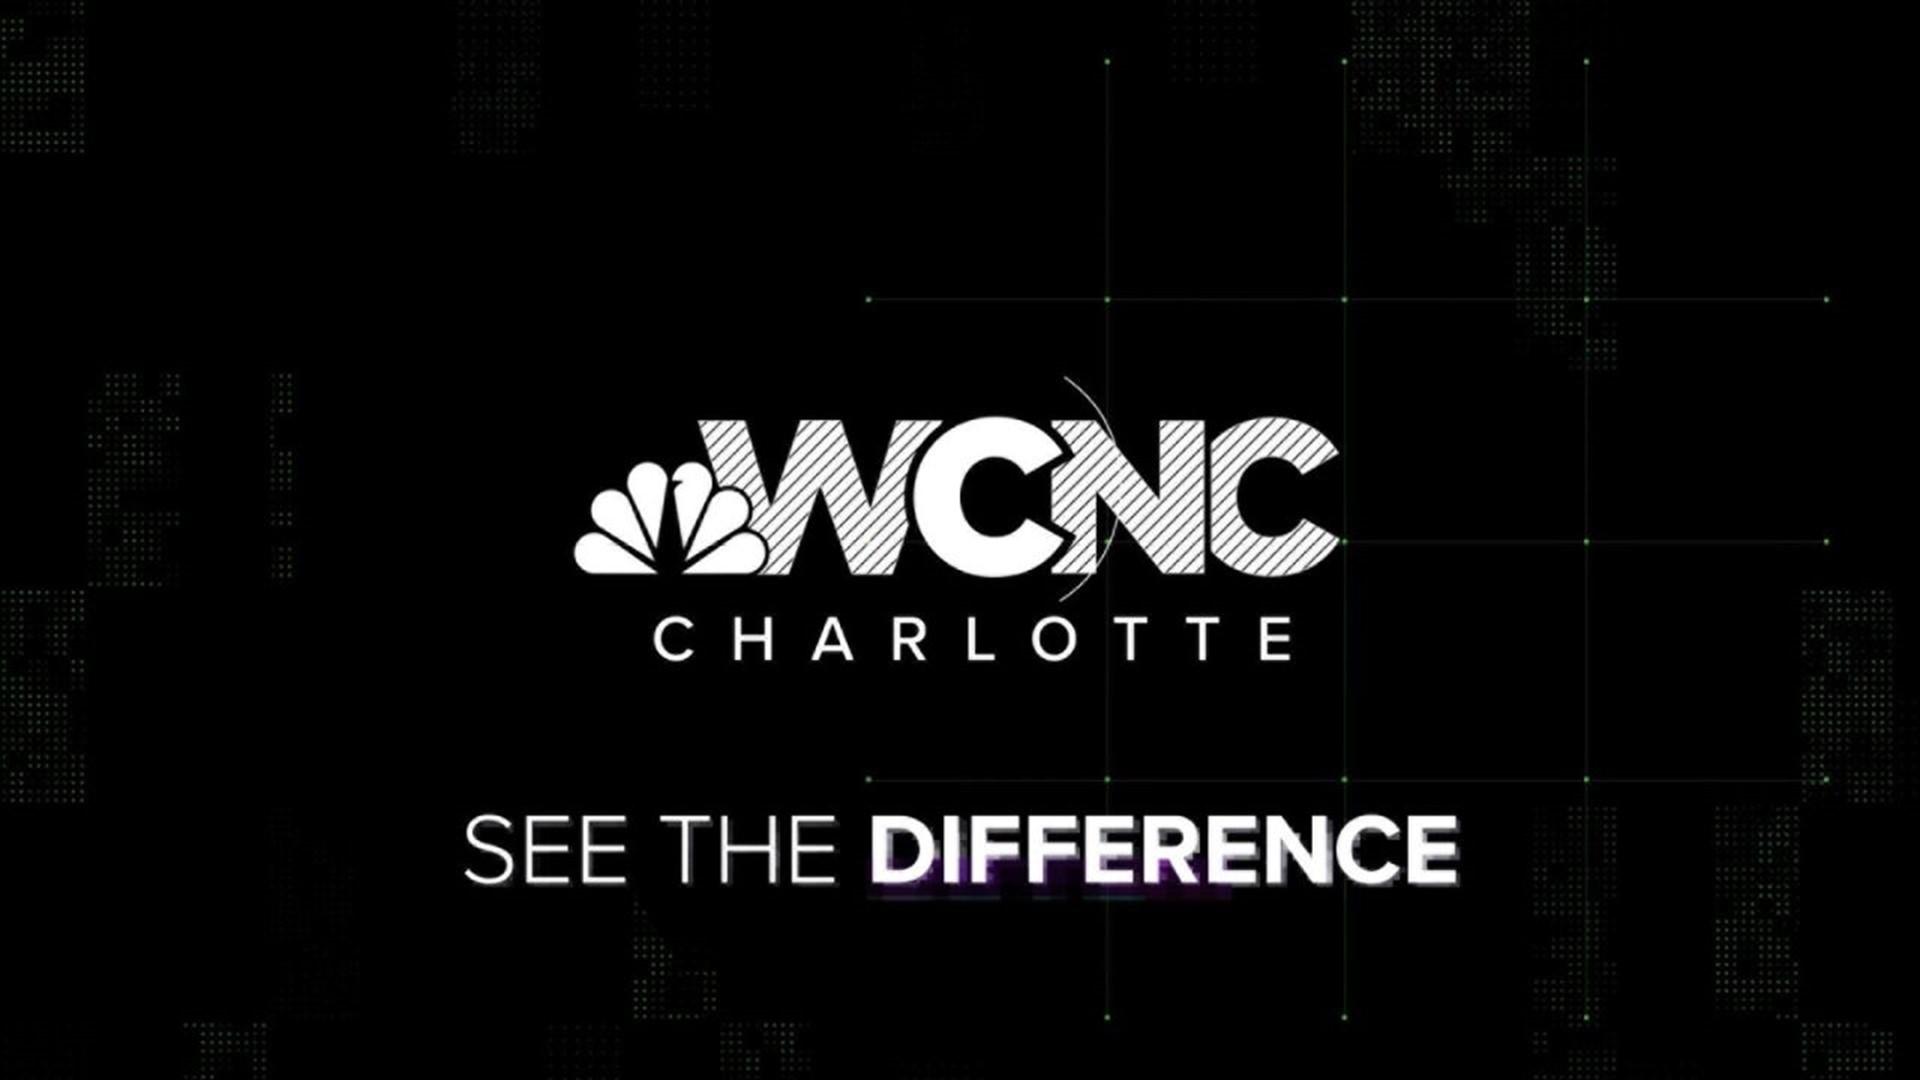 With your help, WCNC Charlotte is making a difference in our community. If you'd like to make a difference, go to wcnc.com/makeadifference now.